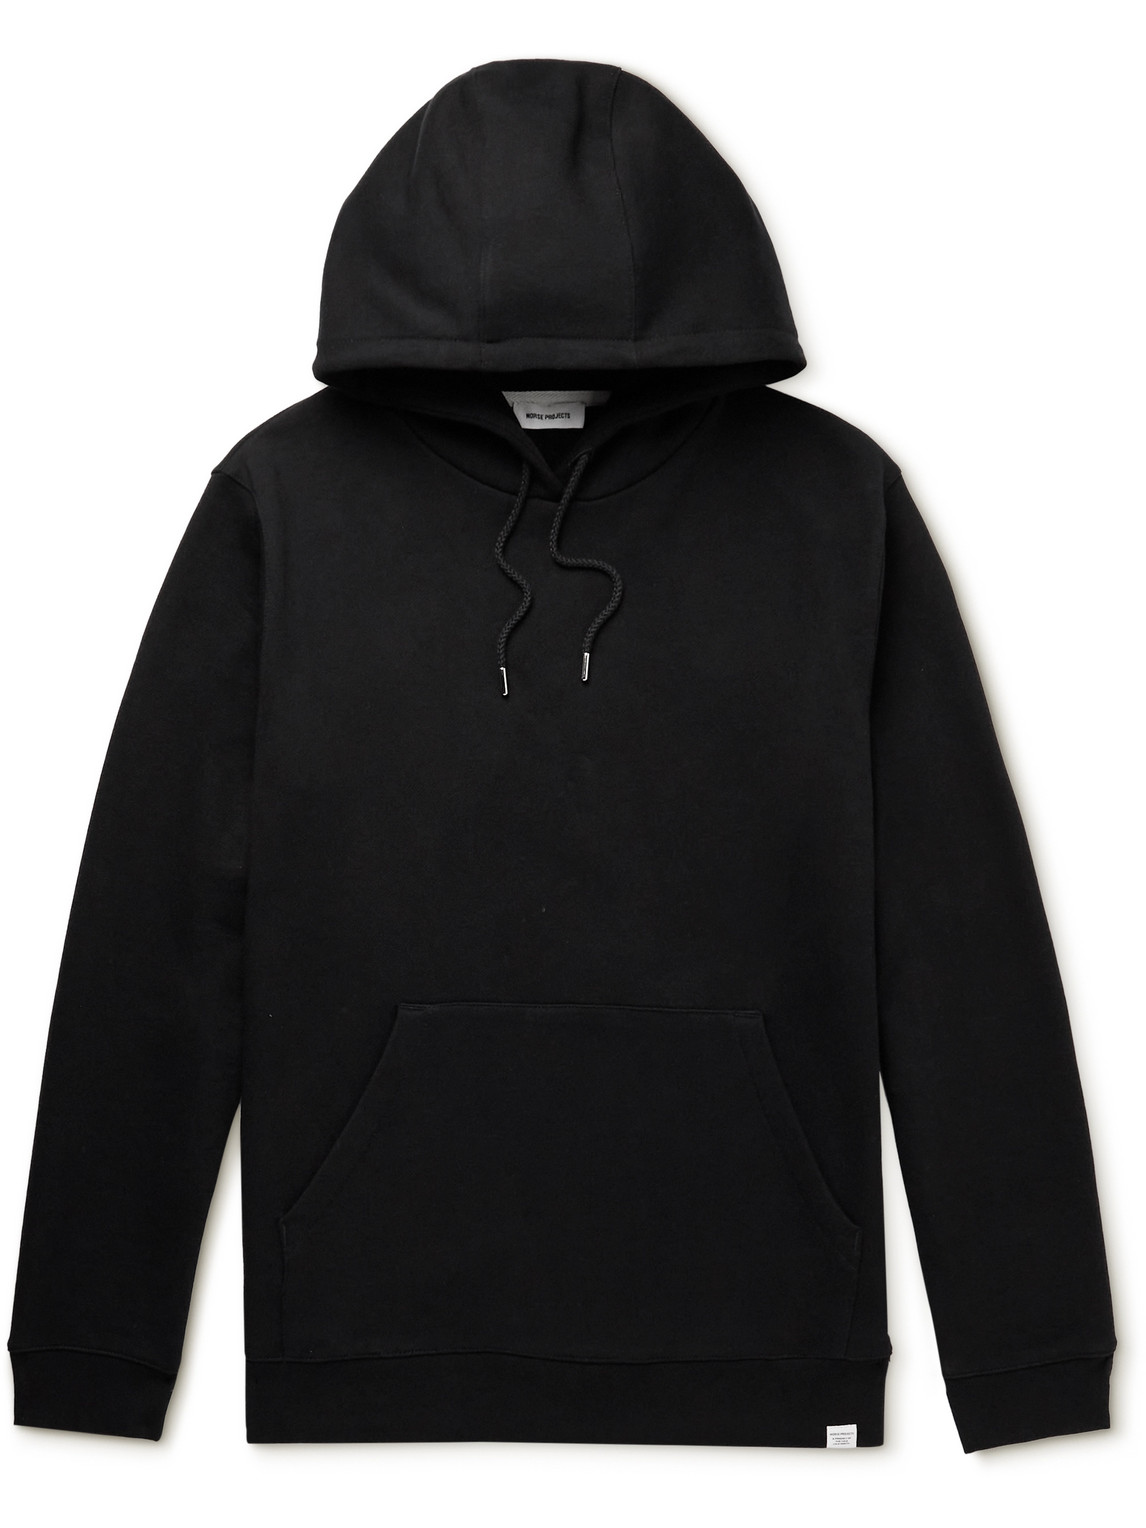 Norse Projects - Vagn Cotton-Jersey Hoodie - Men - Black - XS von Norse Projects